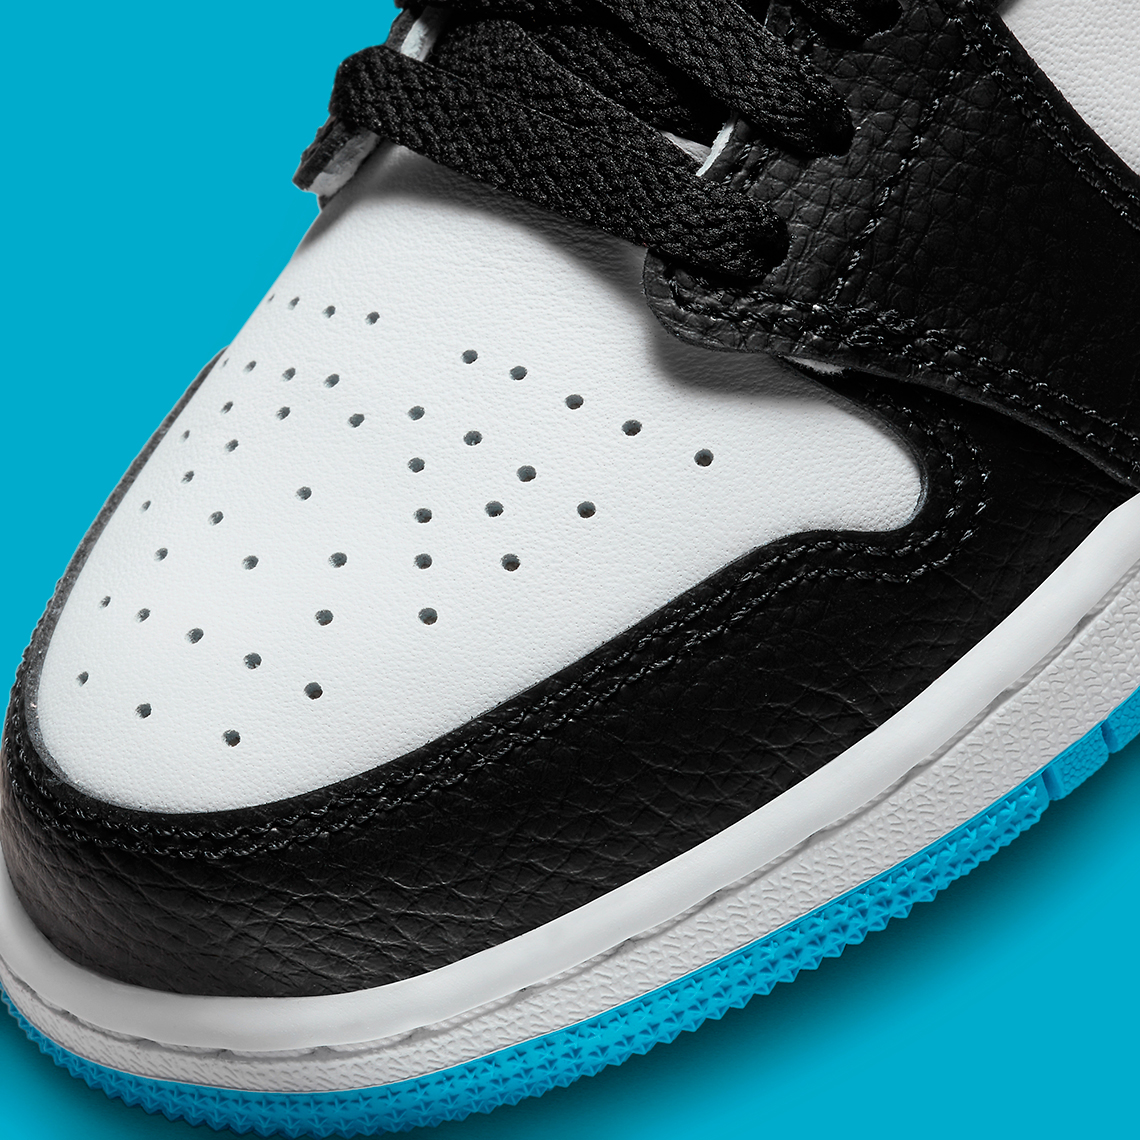 The Air Jordan 1 Low OG UNC to Chi (W) Releases July 26 - Sneaker News